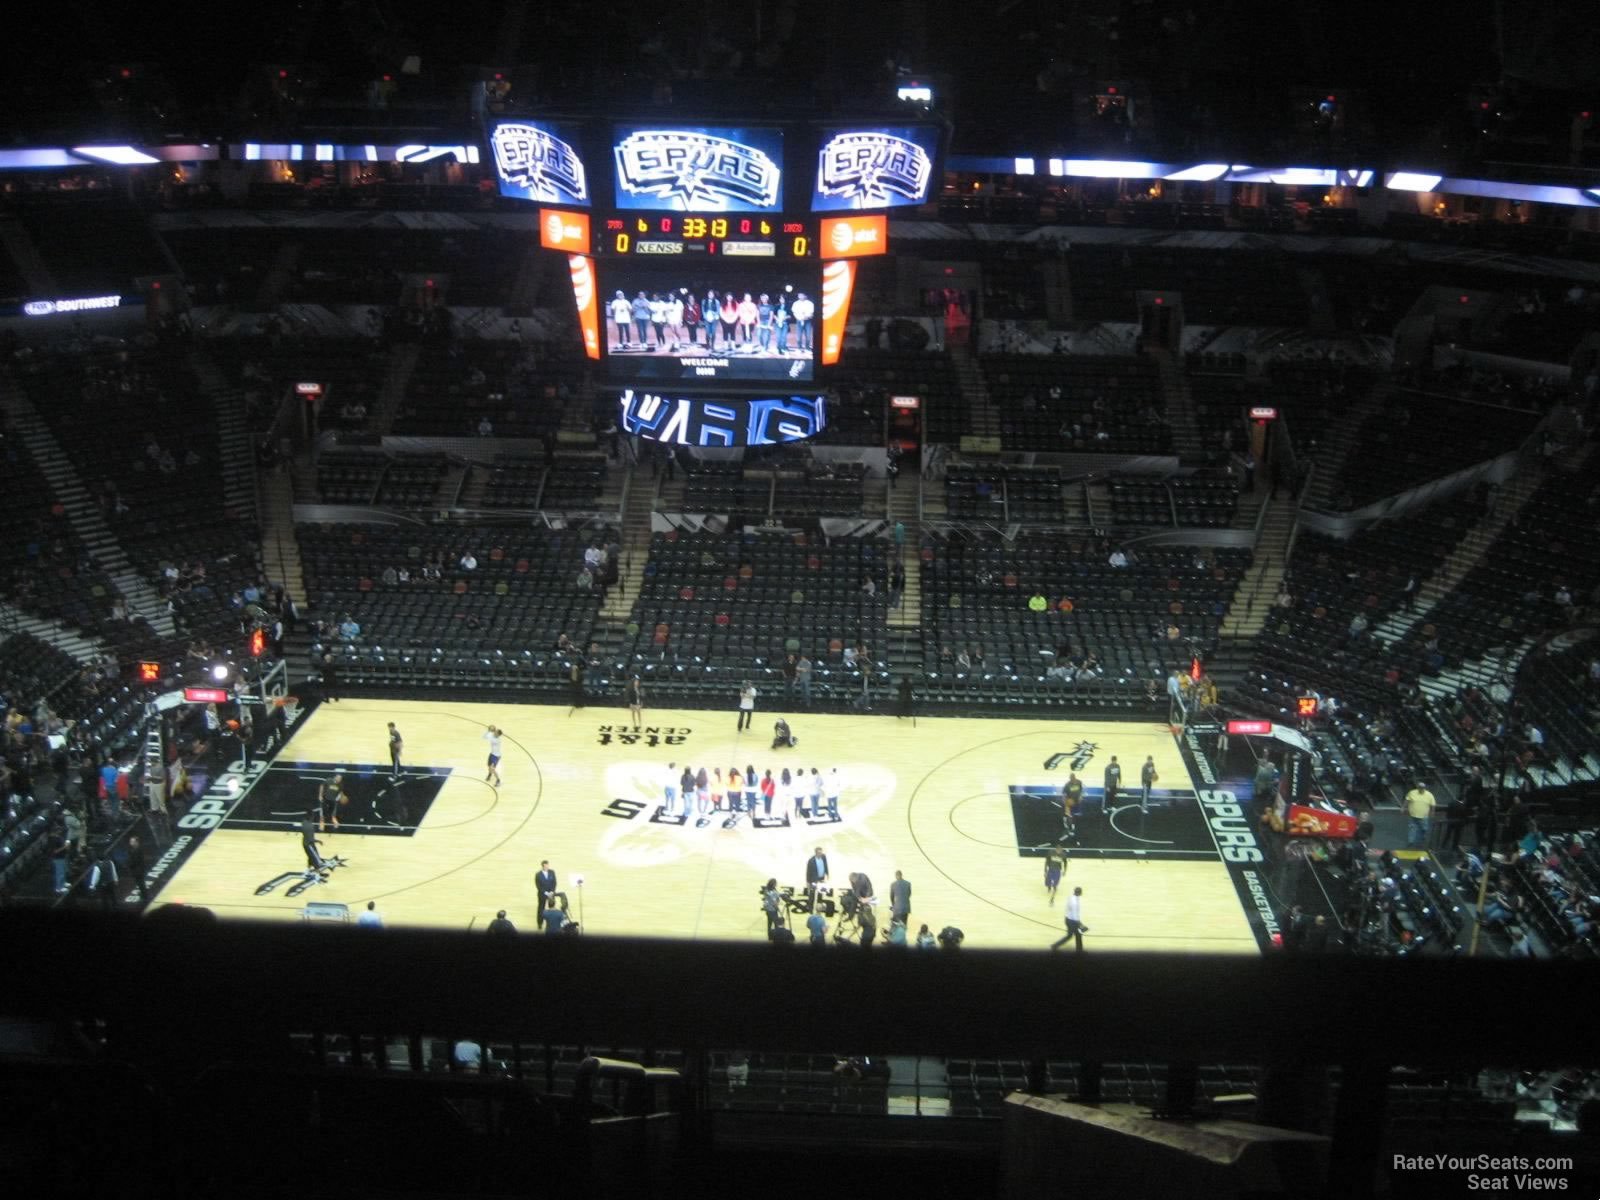 section 208, row 8 seat view  for basketball - at&t center